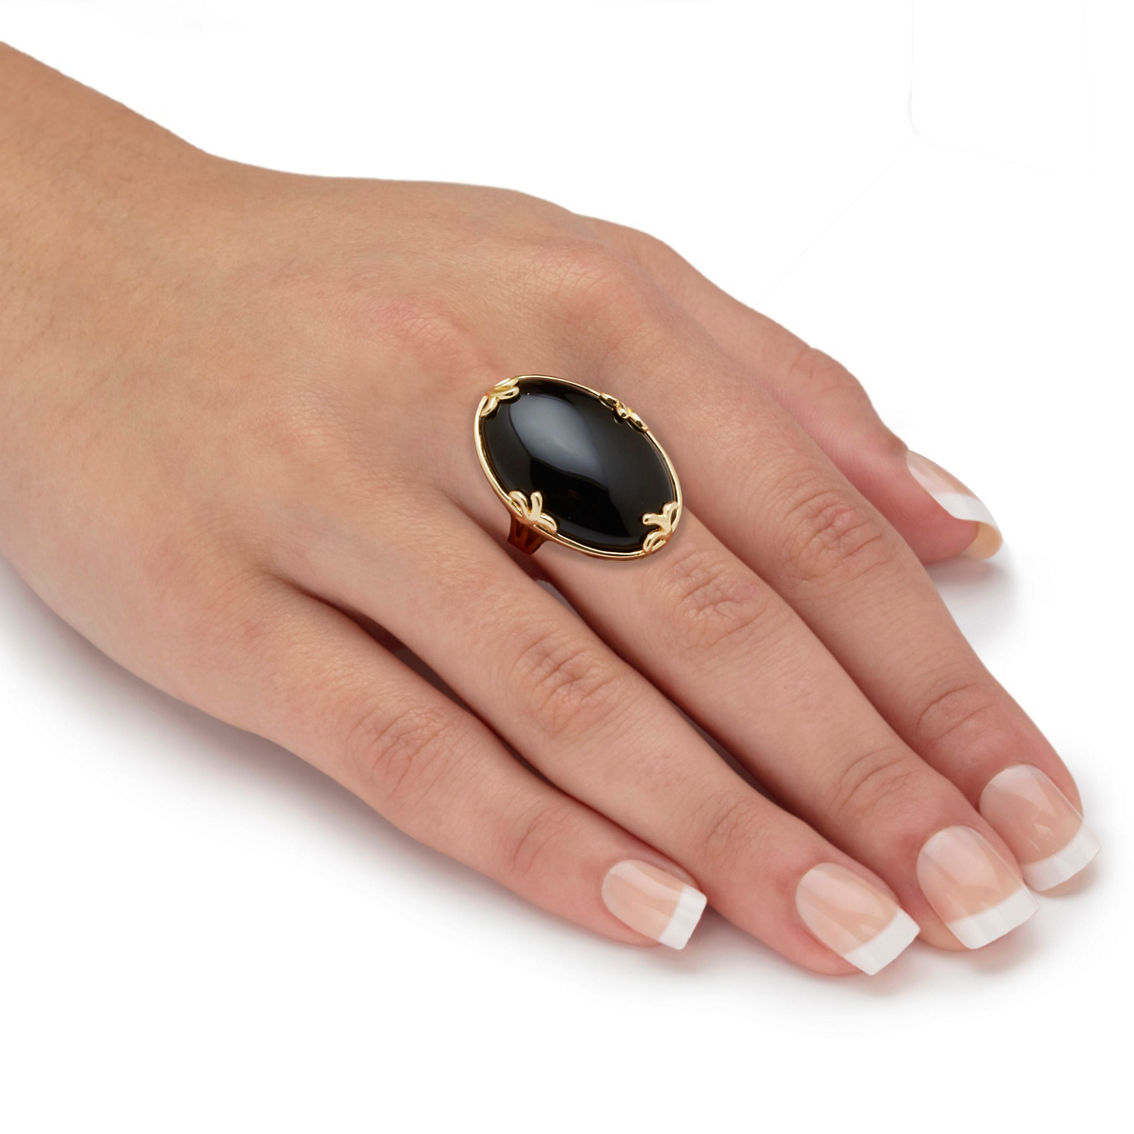 PalmBeach Cabochon Cut Genuine Black Agate 18k Gold-Plated Cocktail Ring - Image 3 of 5